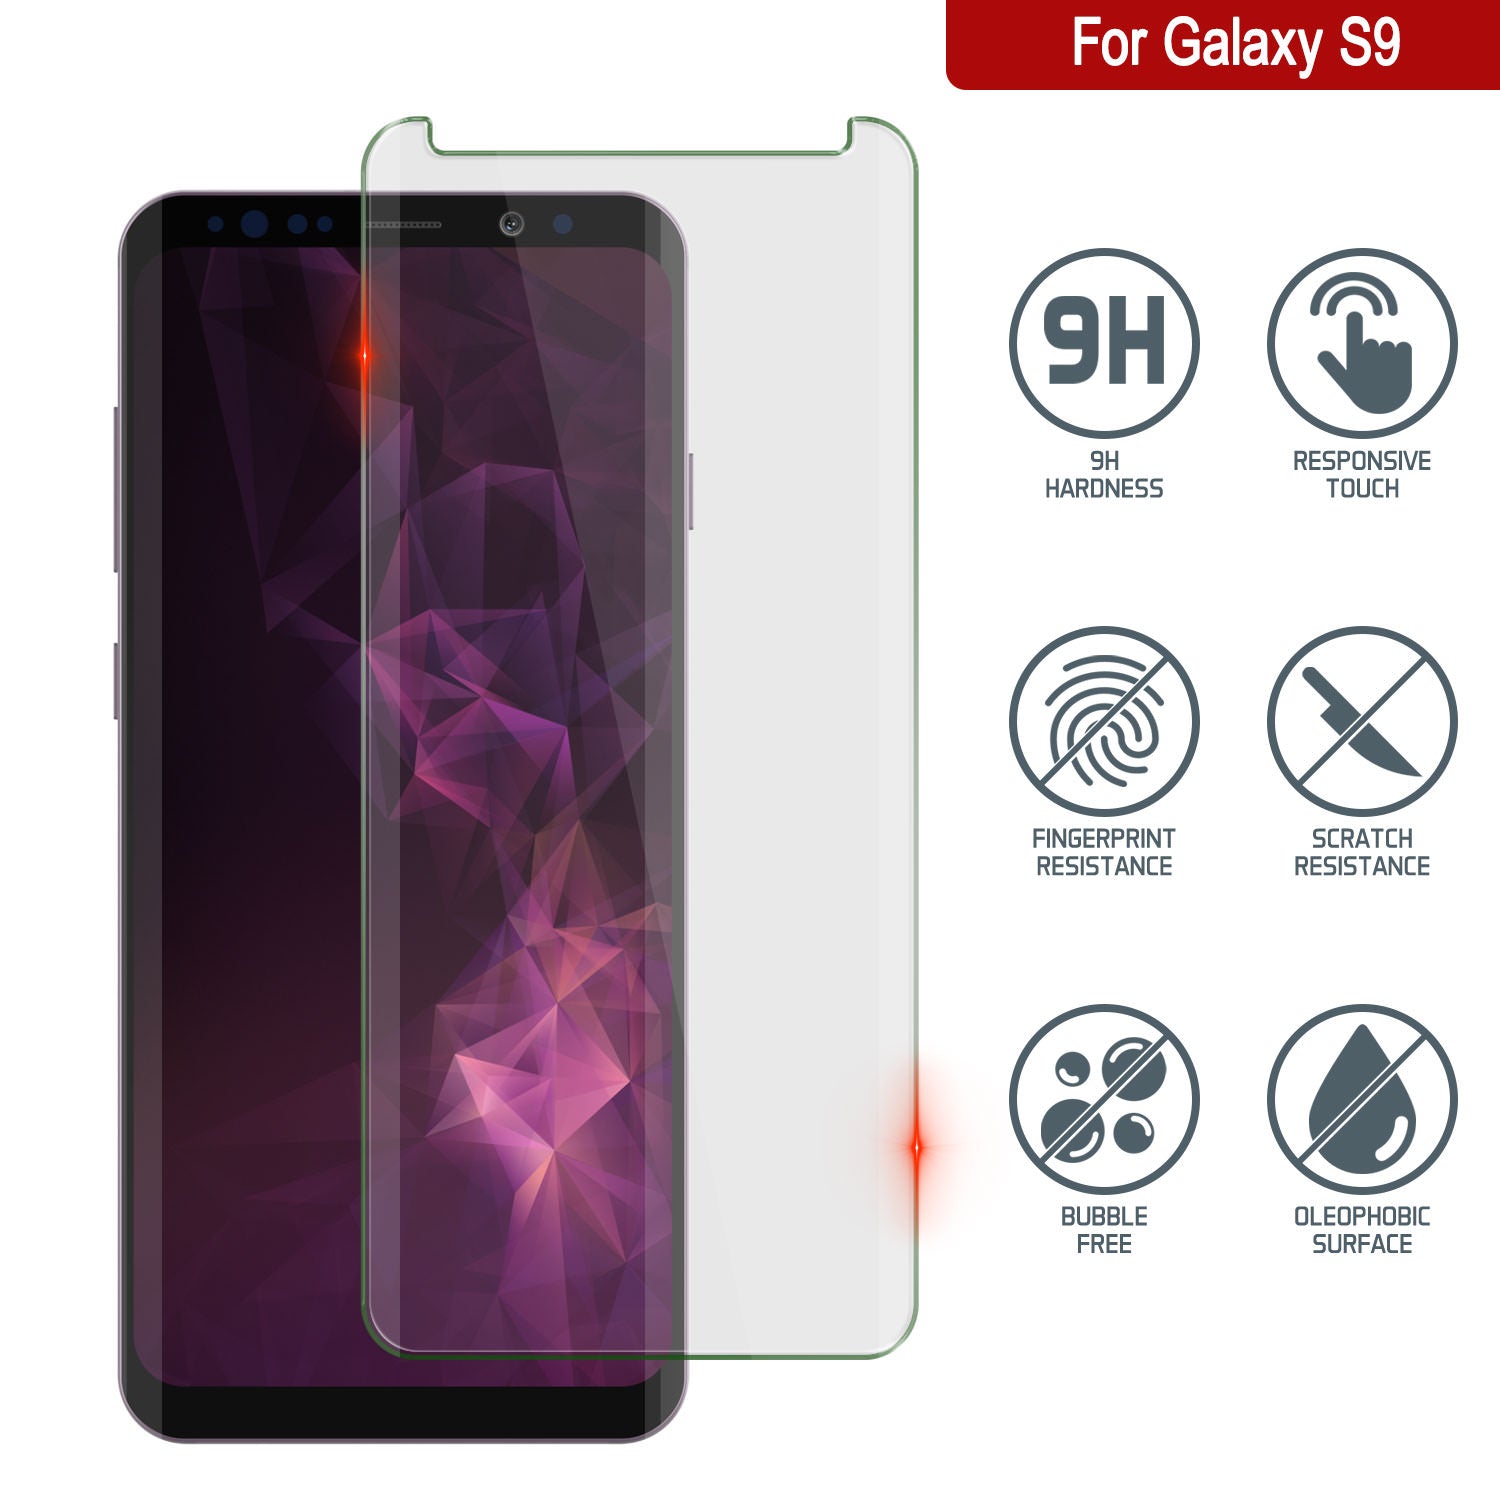 Galaxy S9  White Punkcase Glass SHIELD Tempered Glass Screen Protector 0.33mm Thick 9H Glass